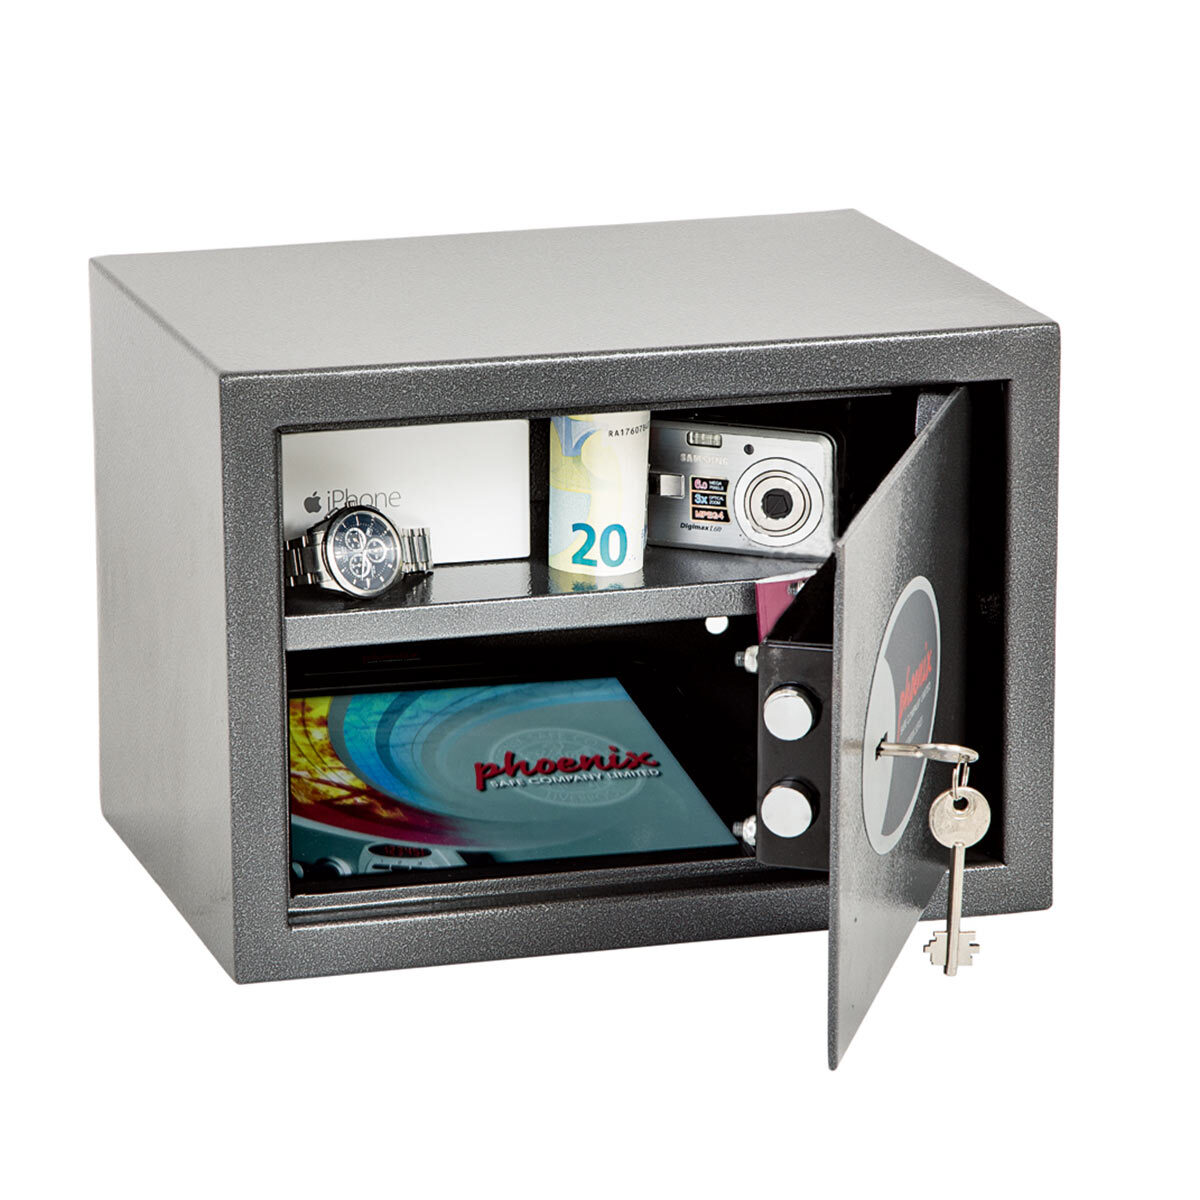 Cut out image of partially open safe on white background